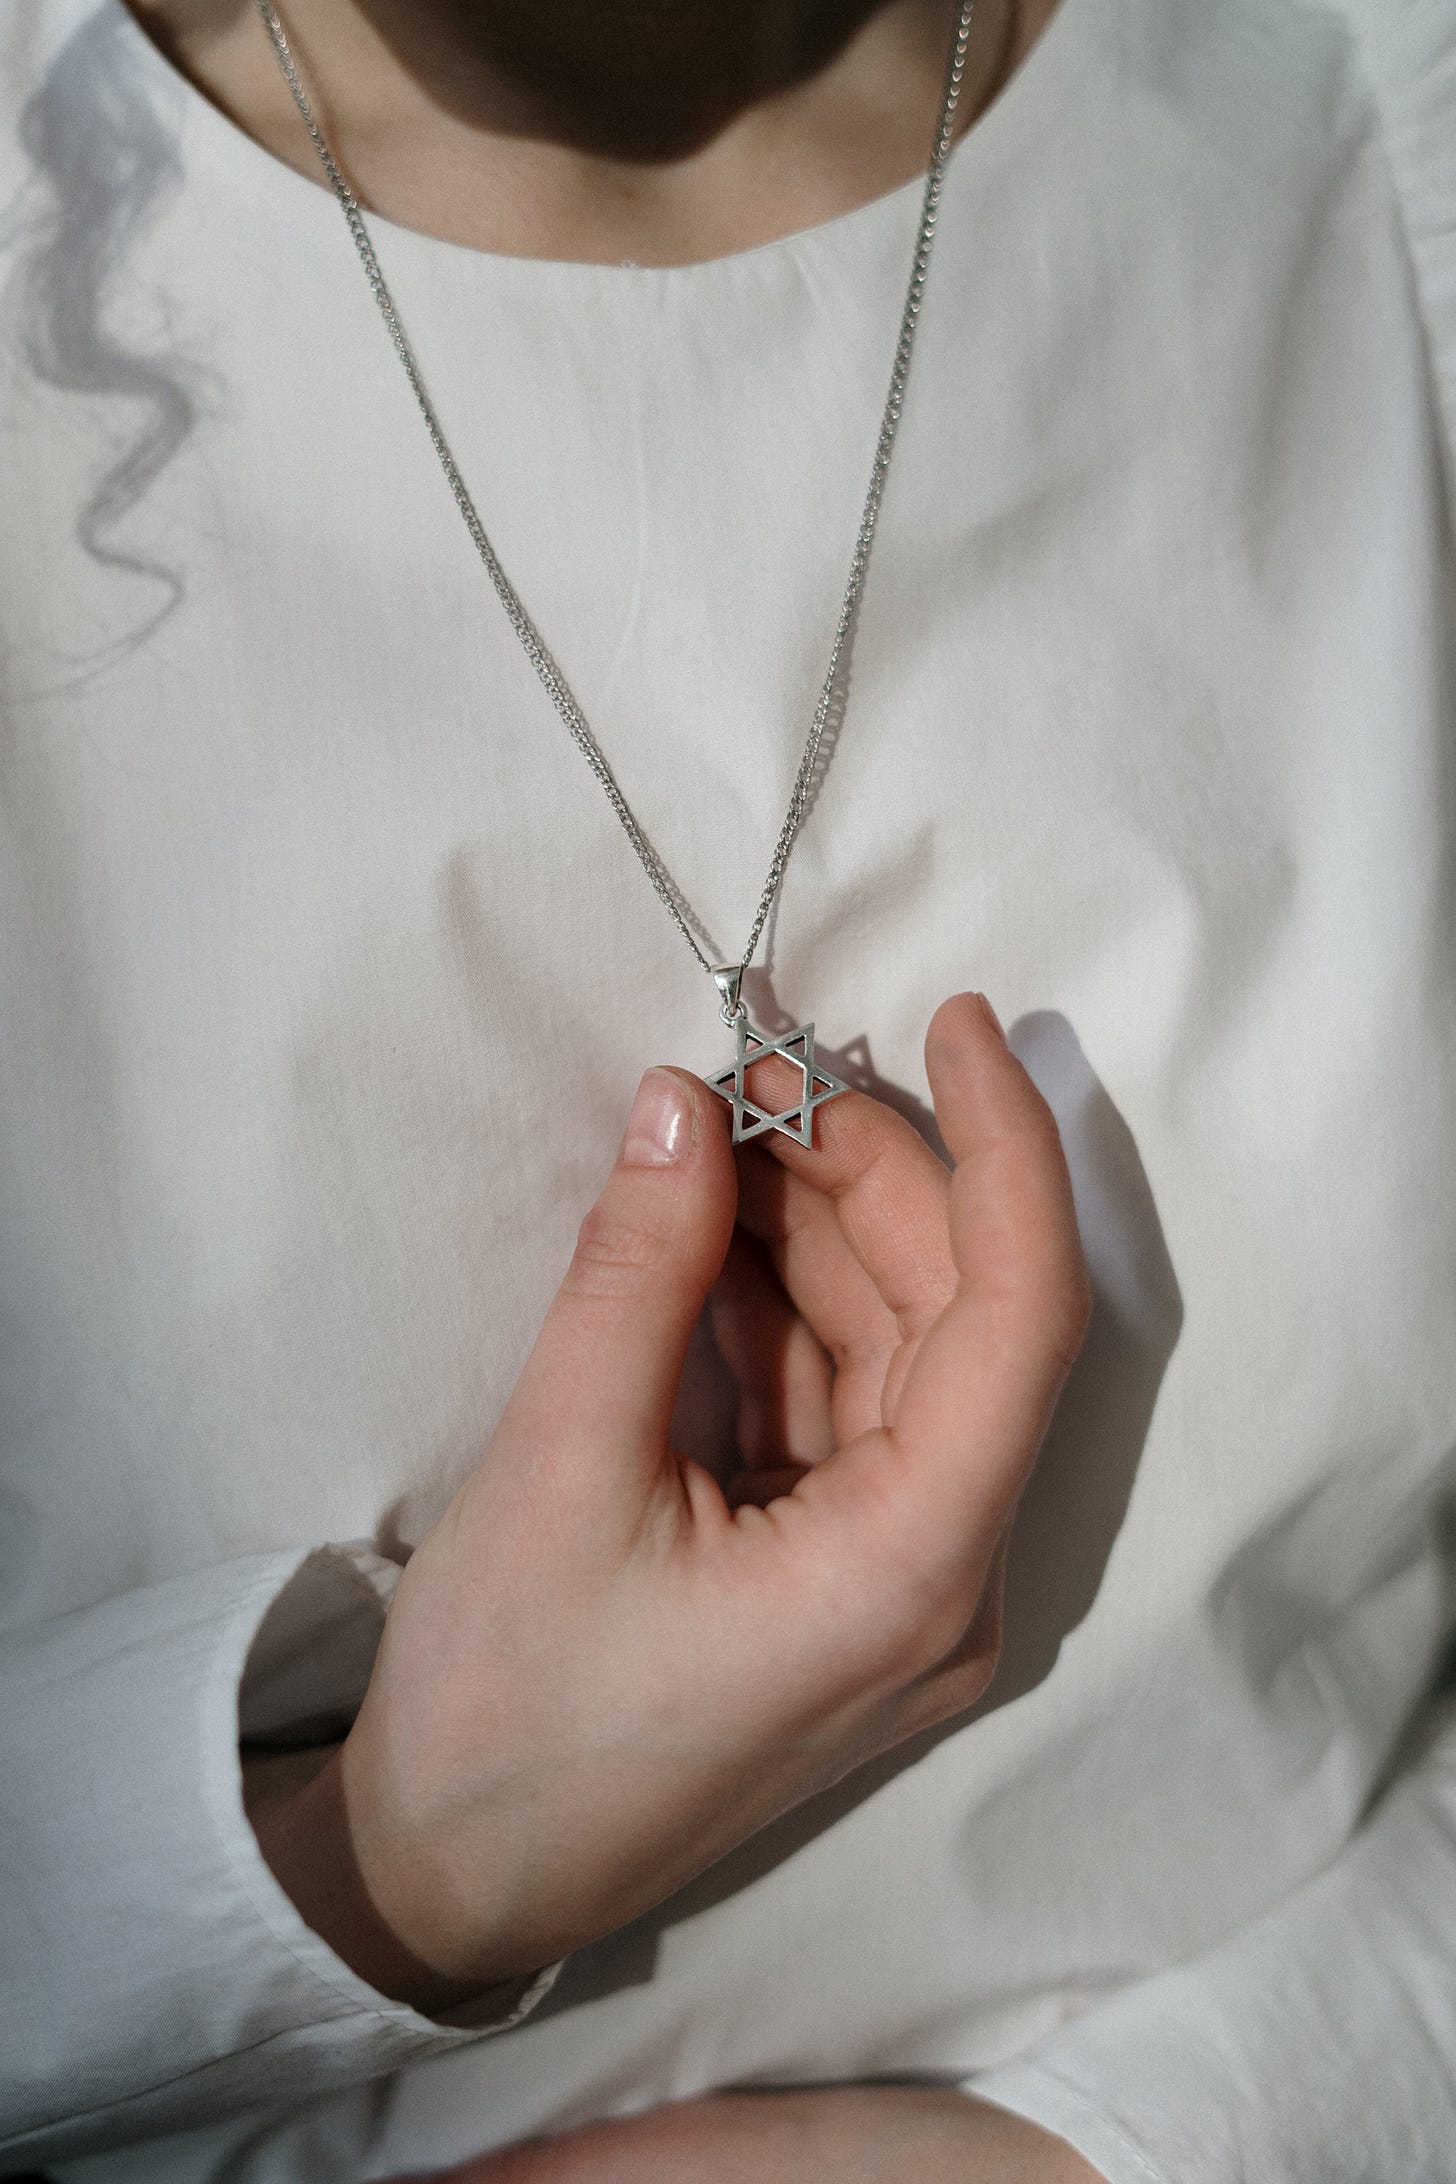 Woman's hand holding a Jewish star necklace against her white shirt, with the shadow of a lock of curly hair.